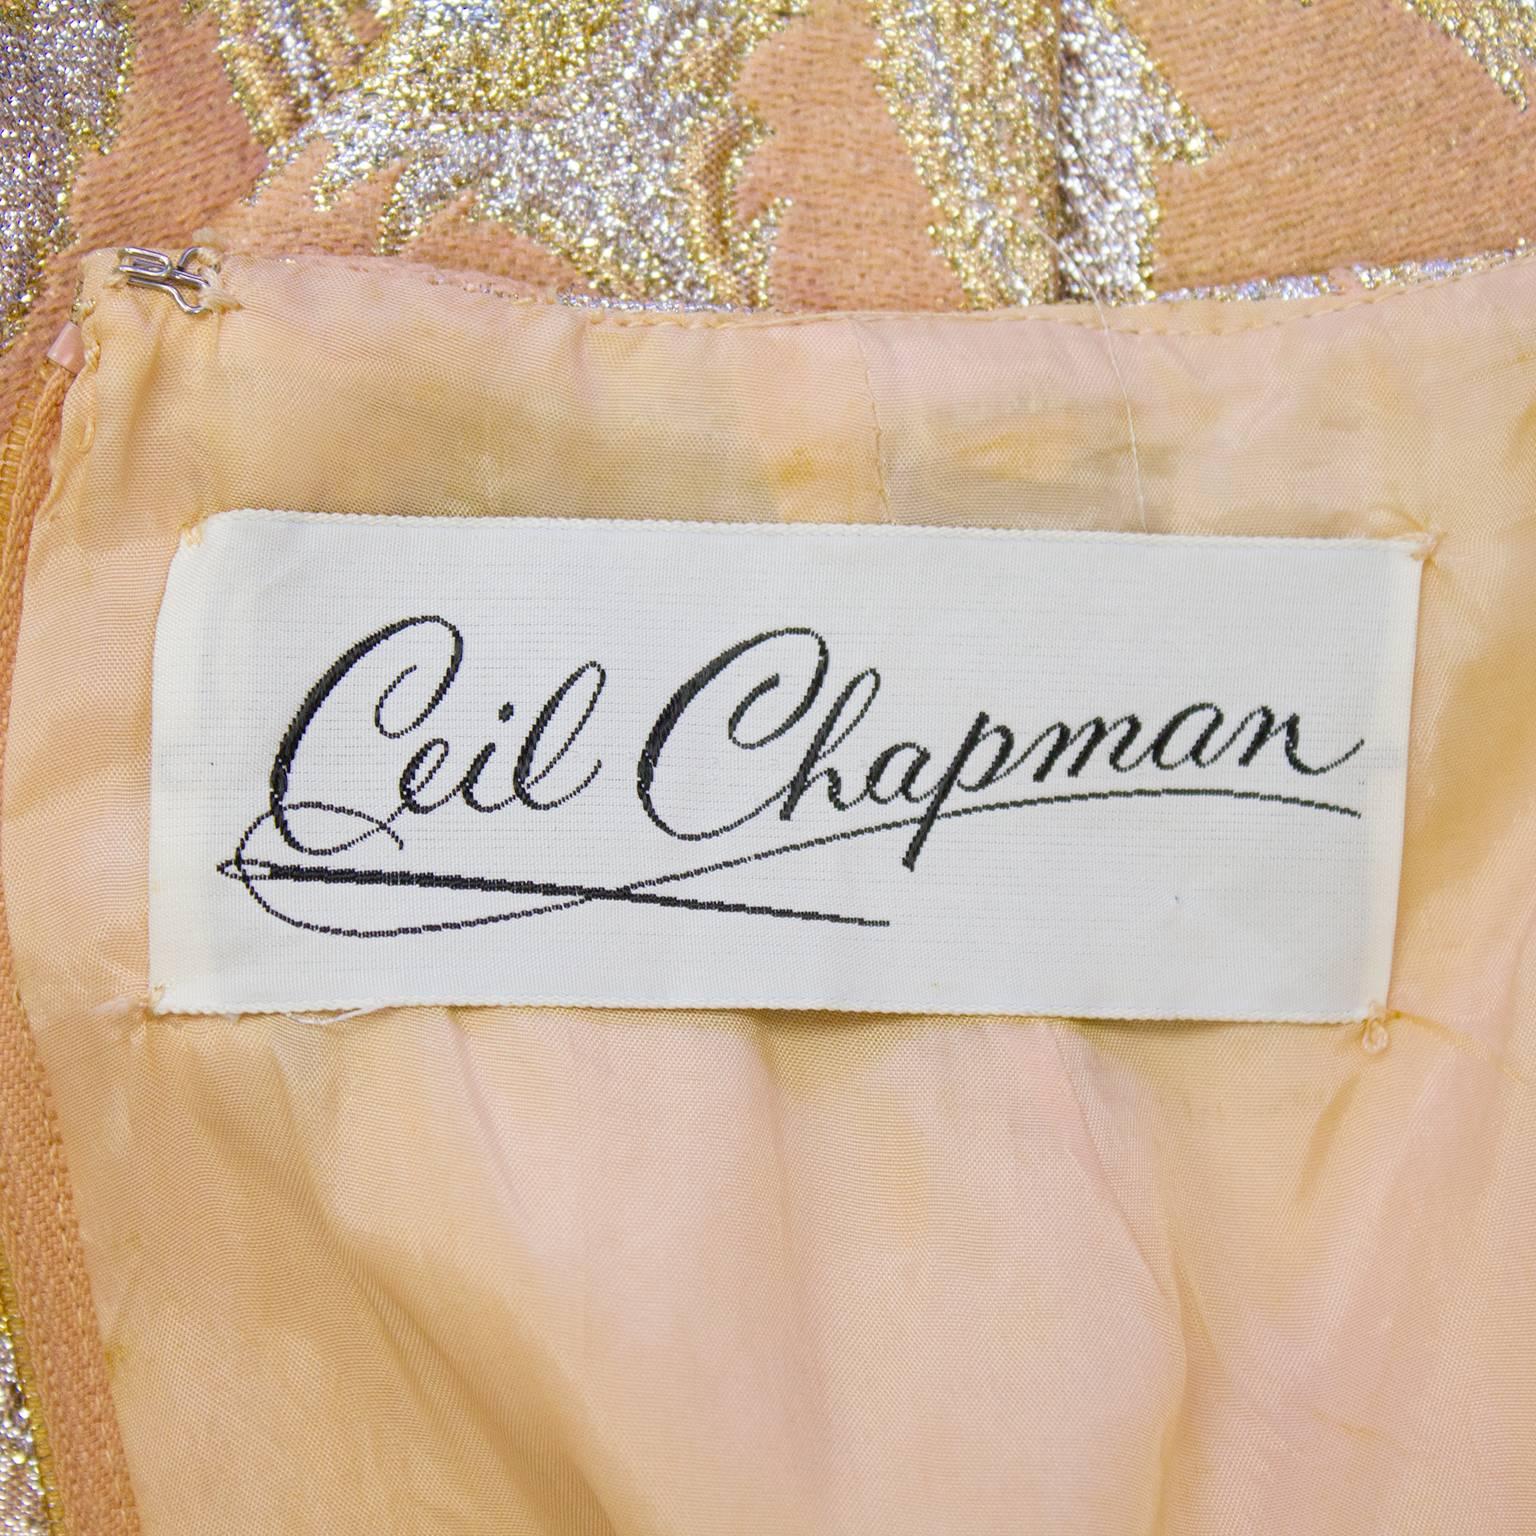 Women's 1960's Ceil Chapman Peach and Metallic Brocade Gown  For Sale